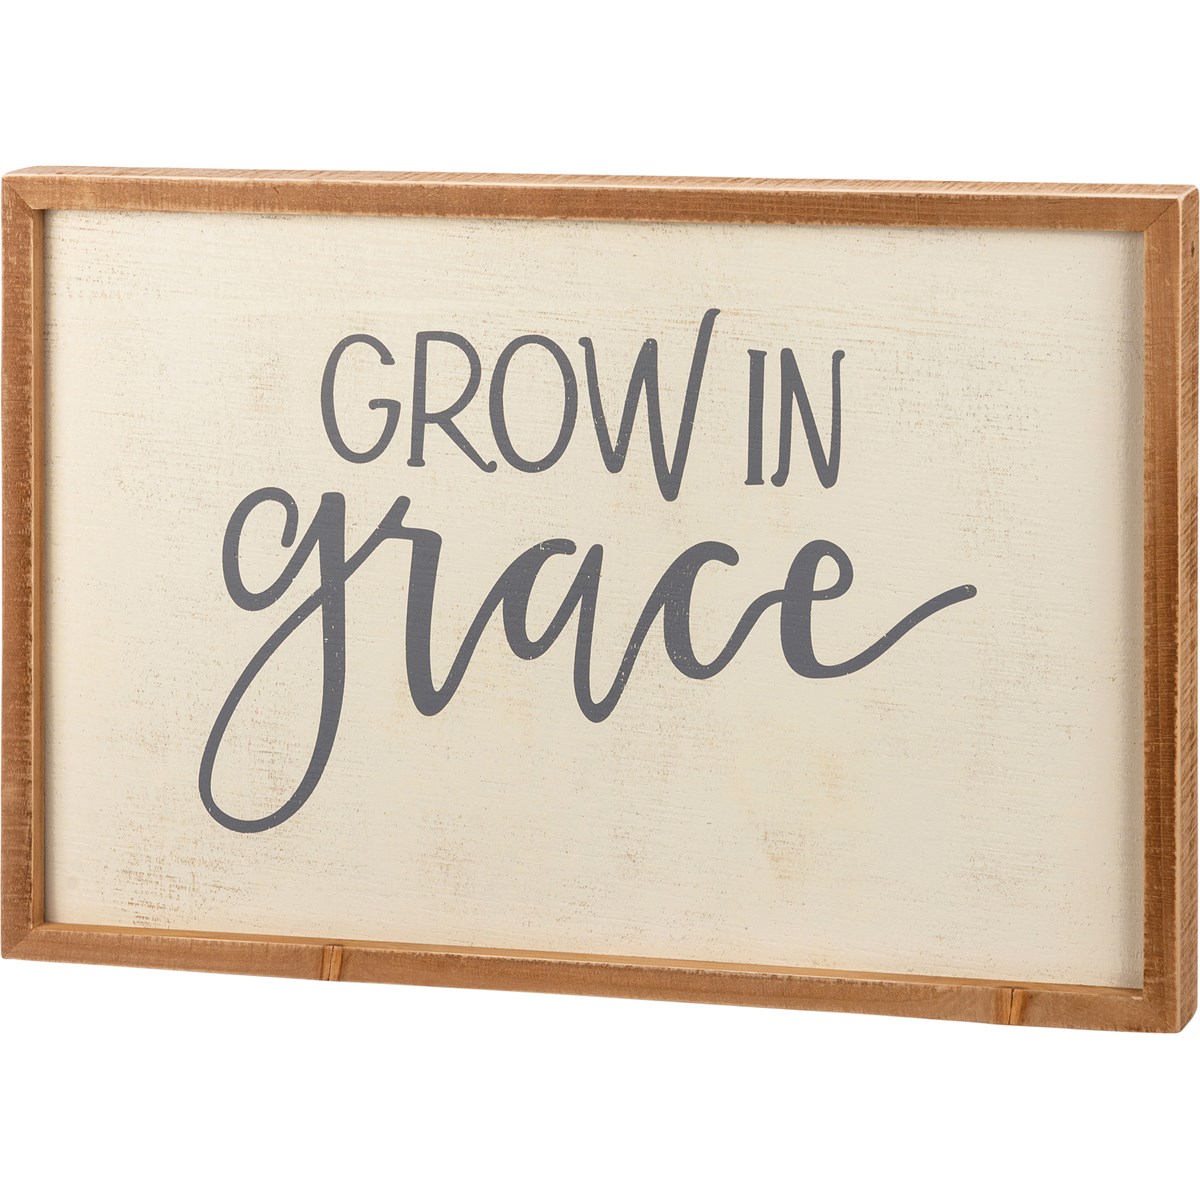 Grow In Grace Inset Box Sign - Wood